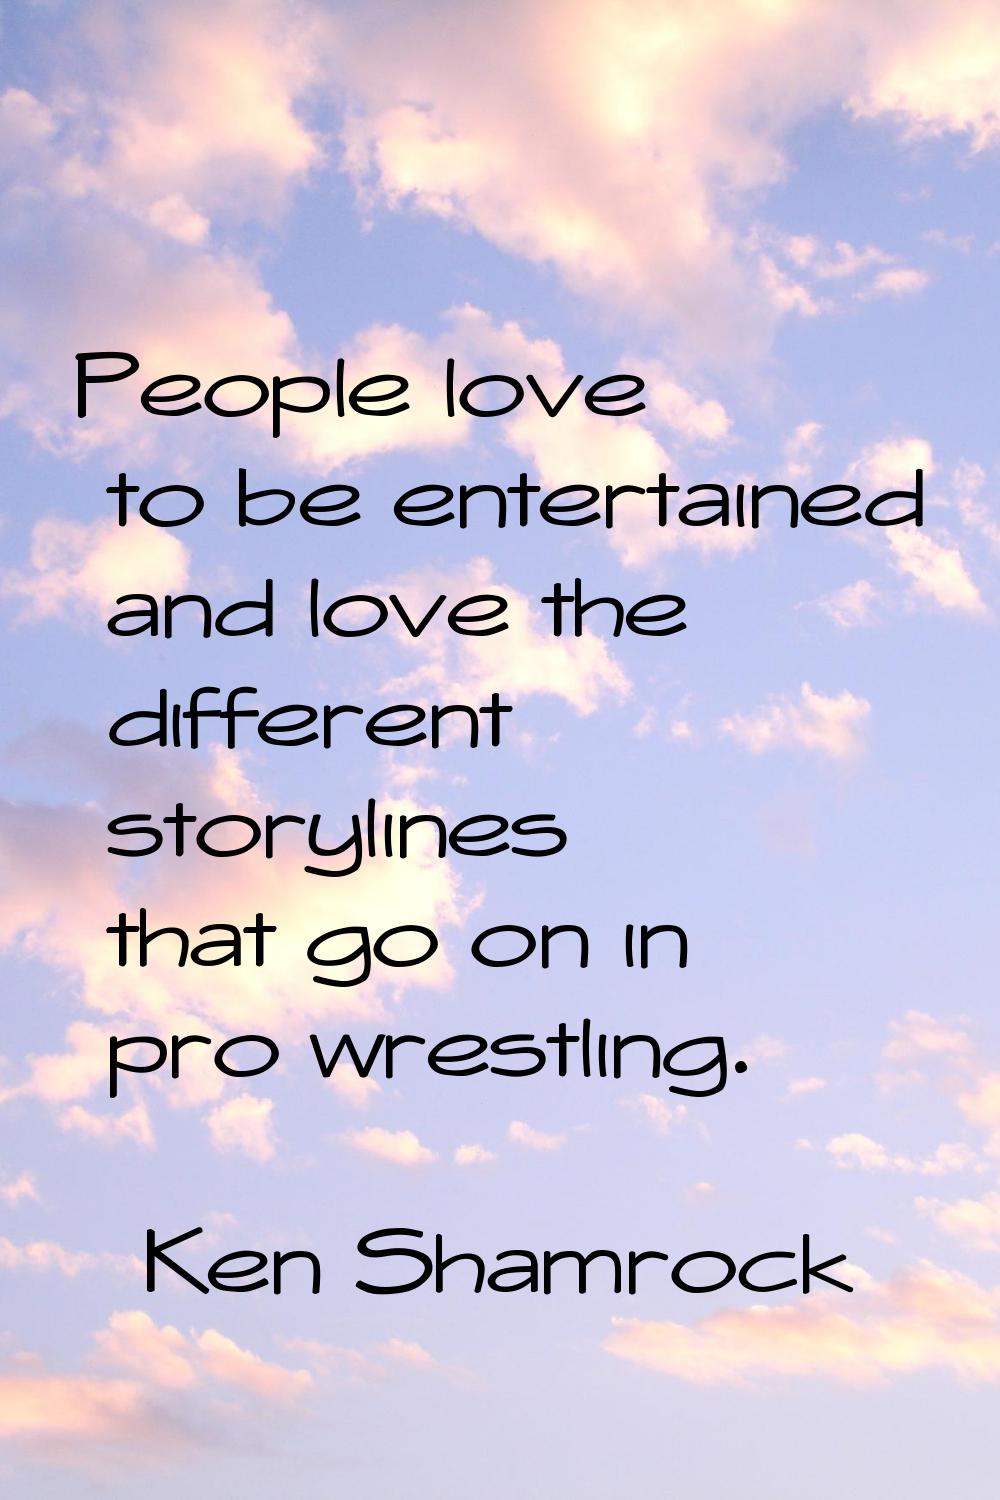 People love to be entertained and love the different storylines that go on in pro wrestling.